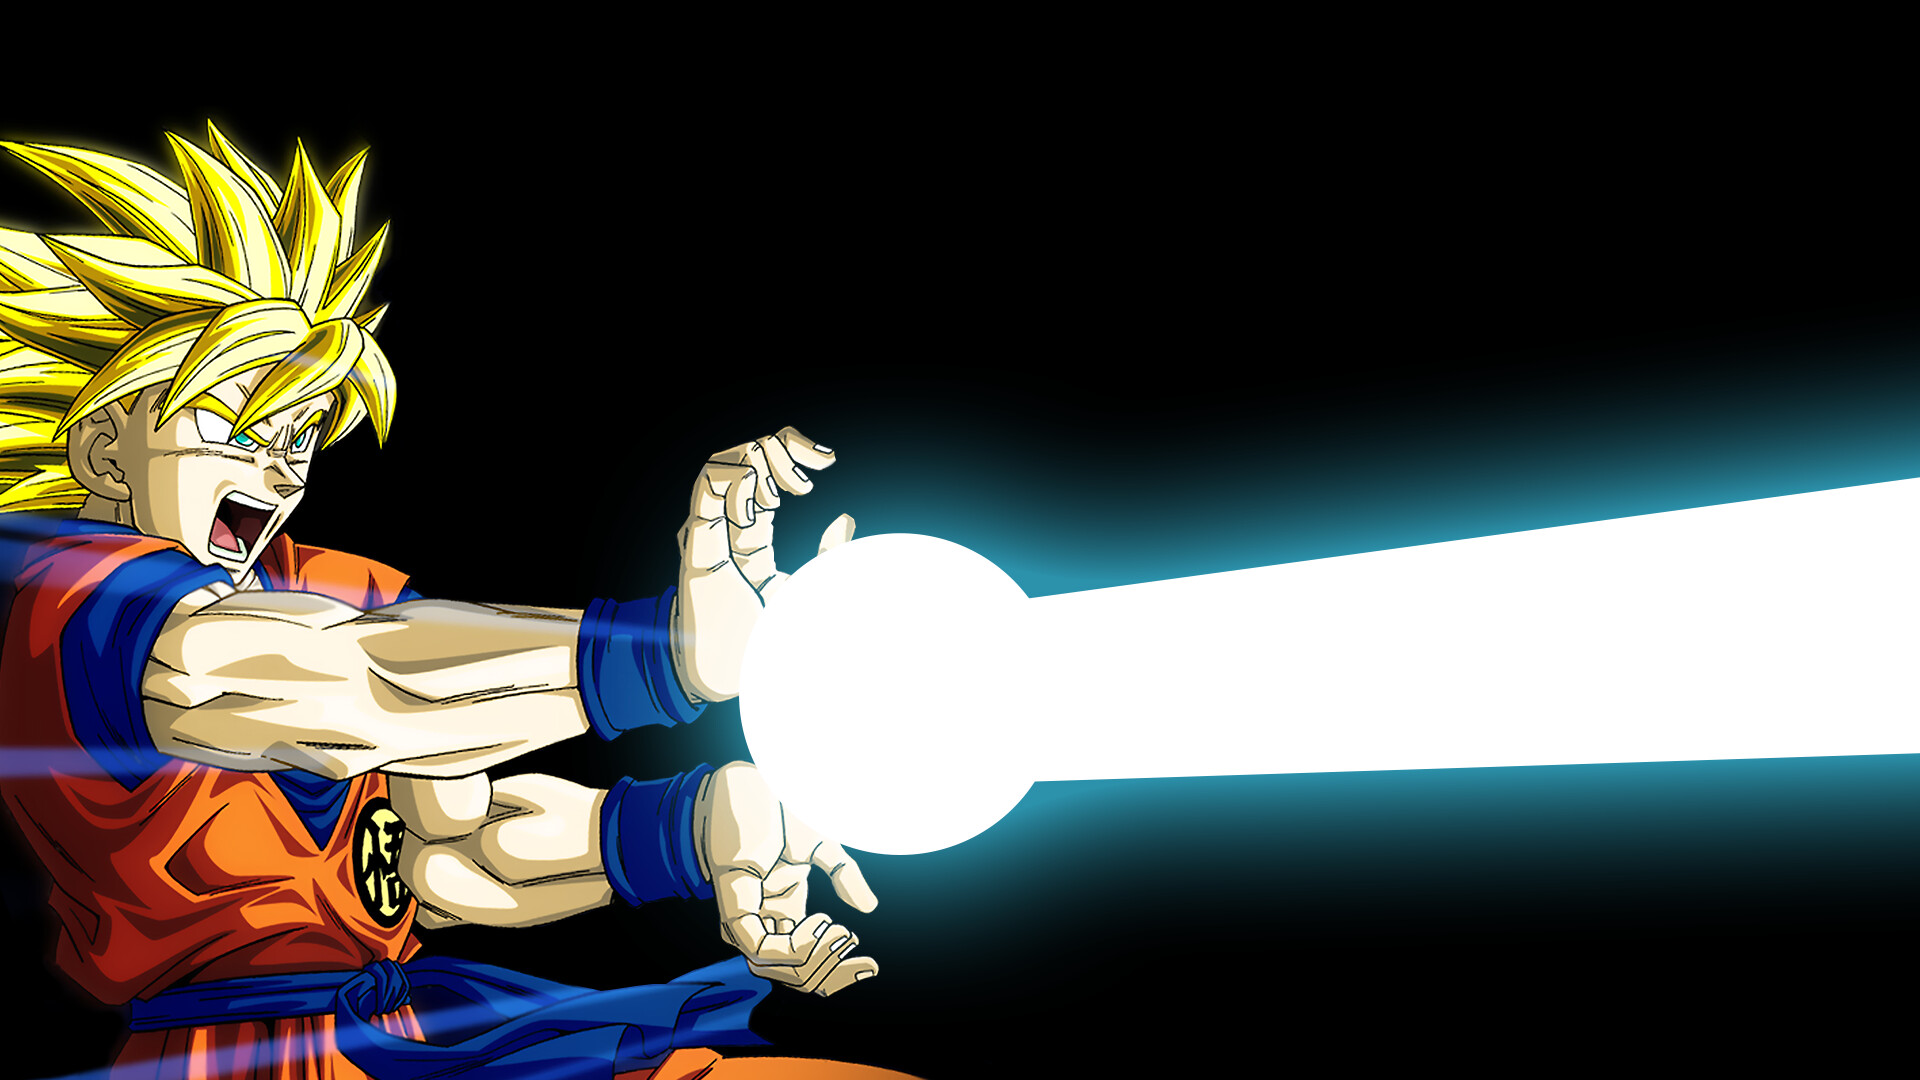 Goku Kamehameha: A fictional technique mainly attributed to Son Goku, A character in the Dragon Ball media franchise. 1920x1080 Full HD Wallpaper.